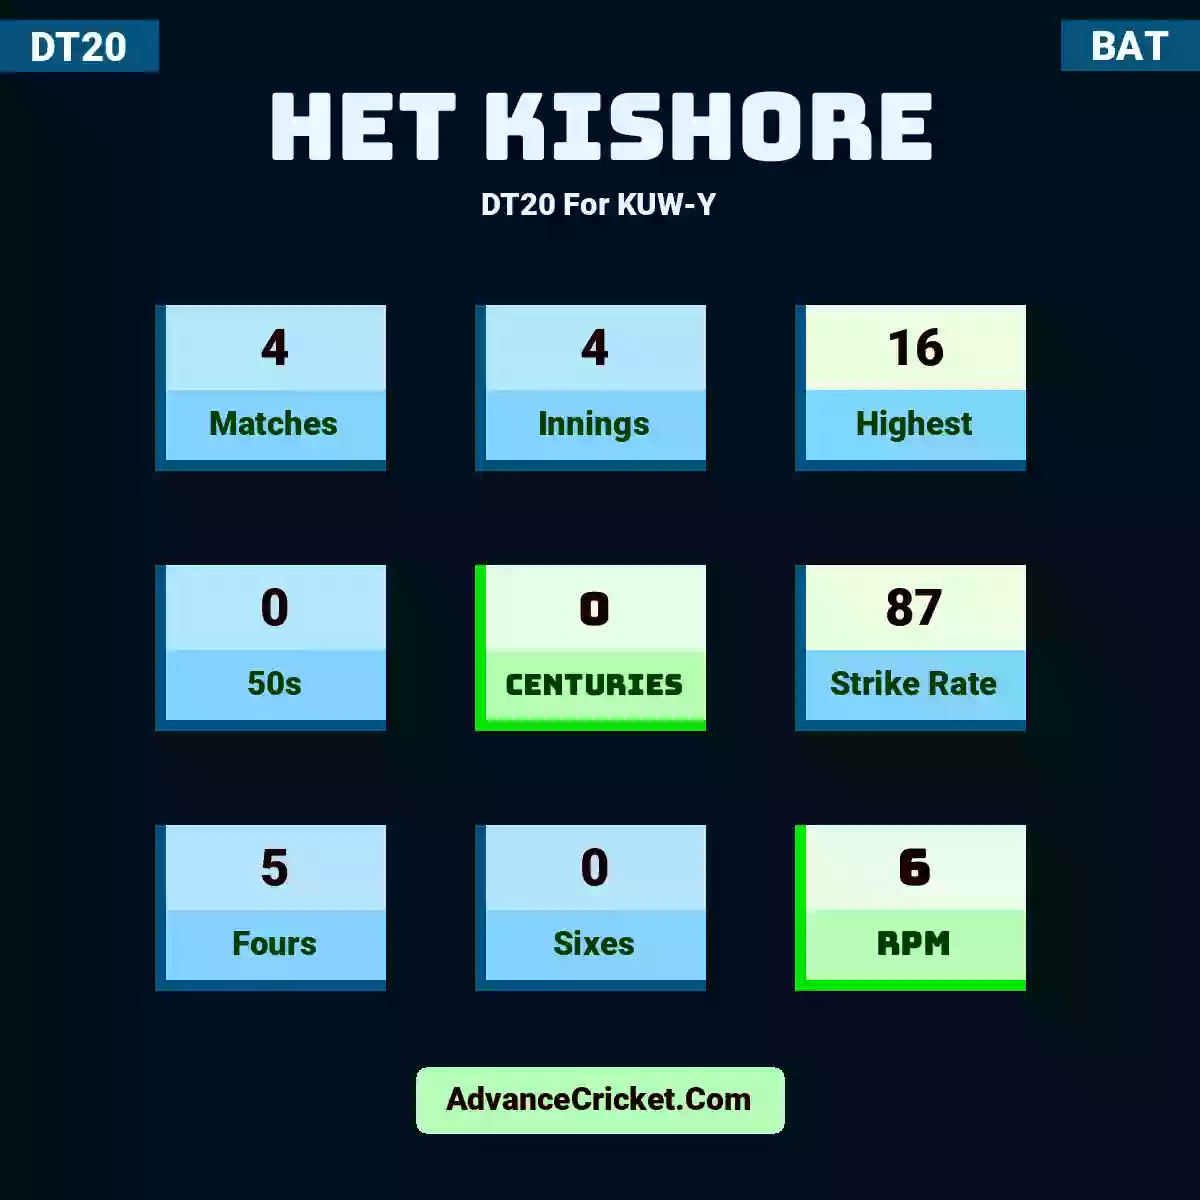 Het Kishore DT20  For KUW-Y, Het Kishore played 4 matches, scored 16 runs as highest, 0 half-centuries, and 0 centuries, with a strike rate of 87. H.Kishore hit 5 fours and 0 sixes, with an RPM of 6.